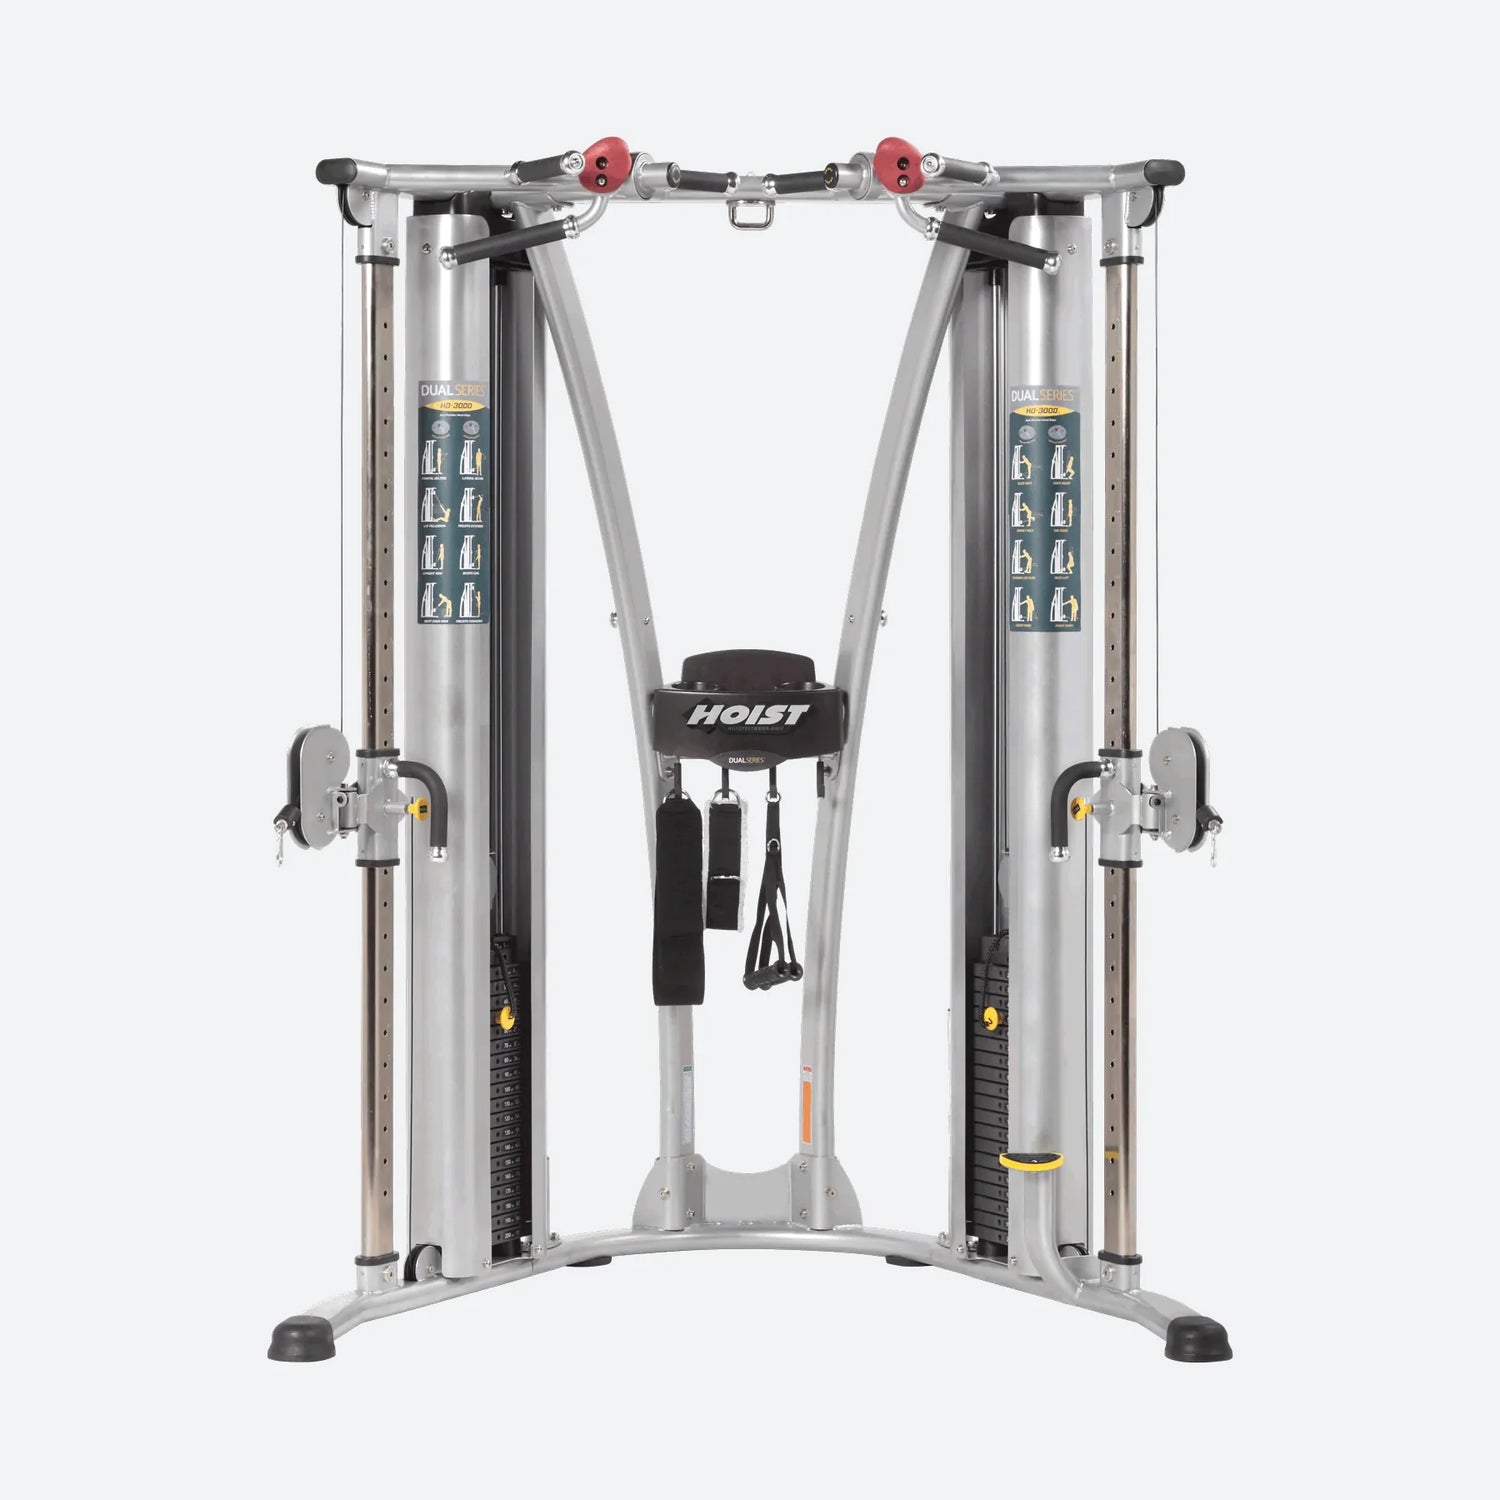 Shop the Hoist Fitness CF-3962 Fitness Tree - Treadmill Outlet